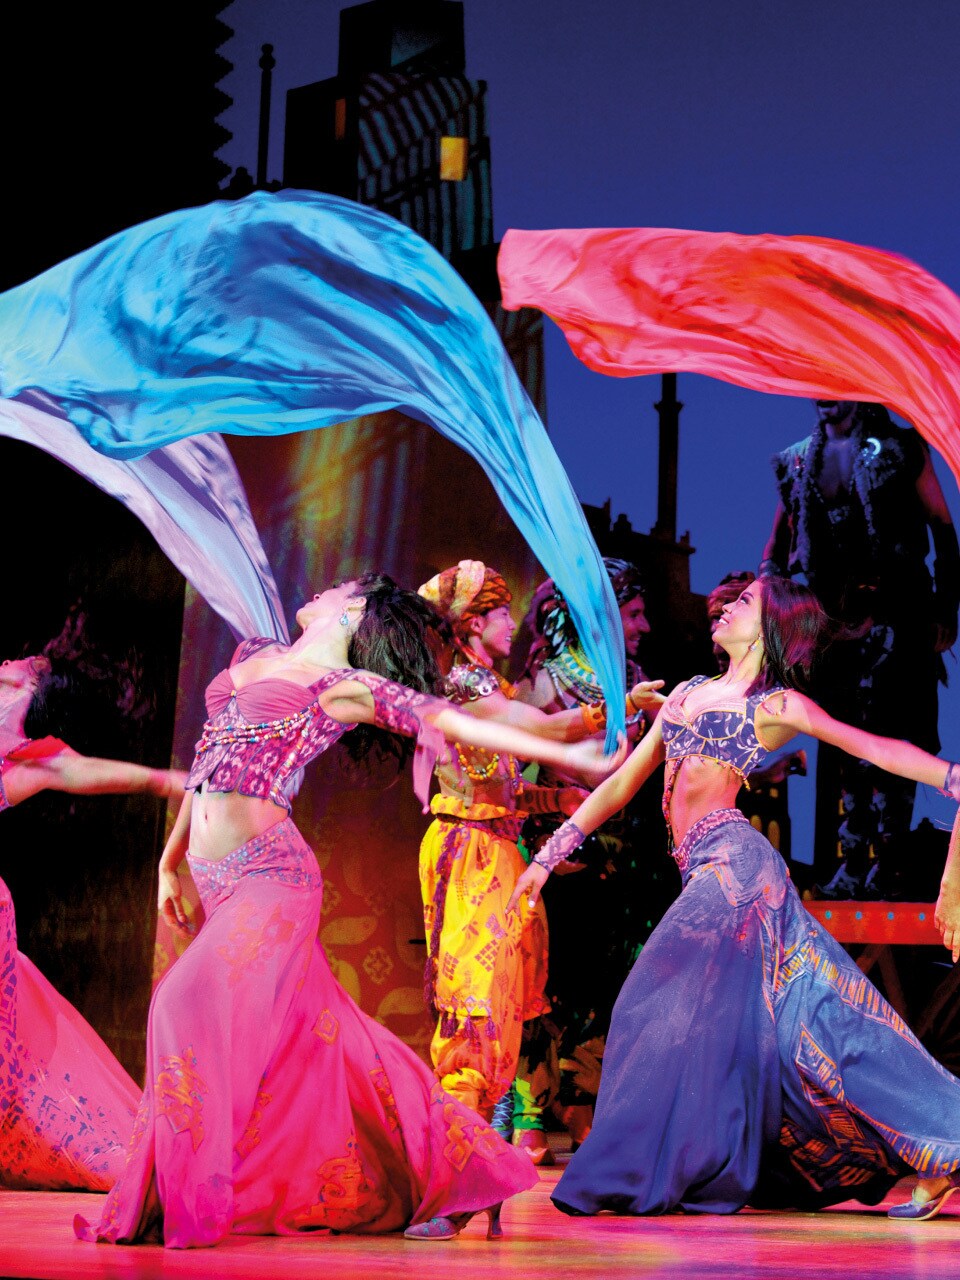 The Aladdin ensemble on stage dancing with colourful silks. cloths floating.